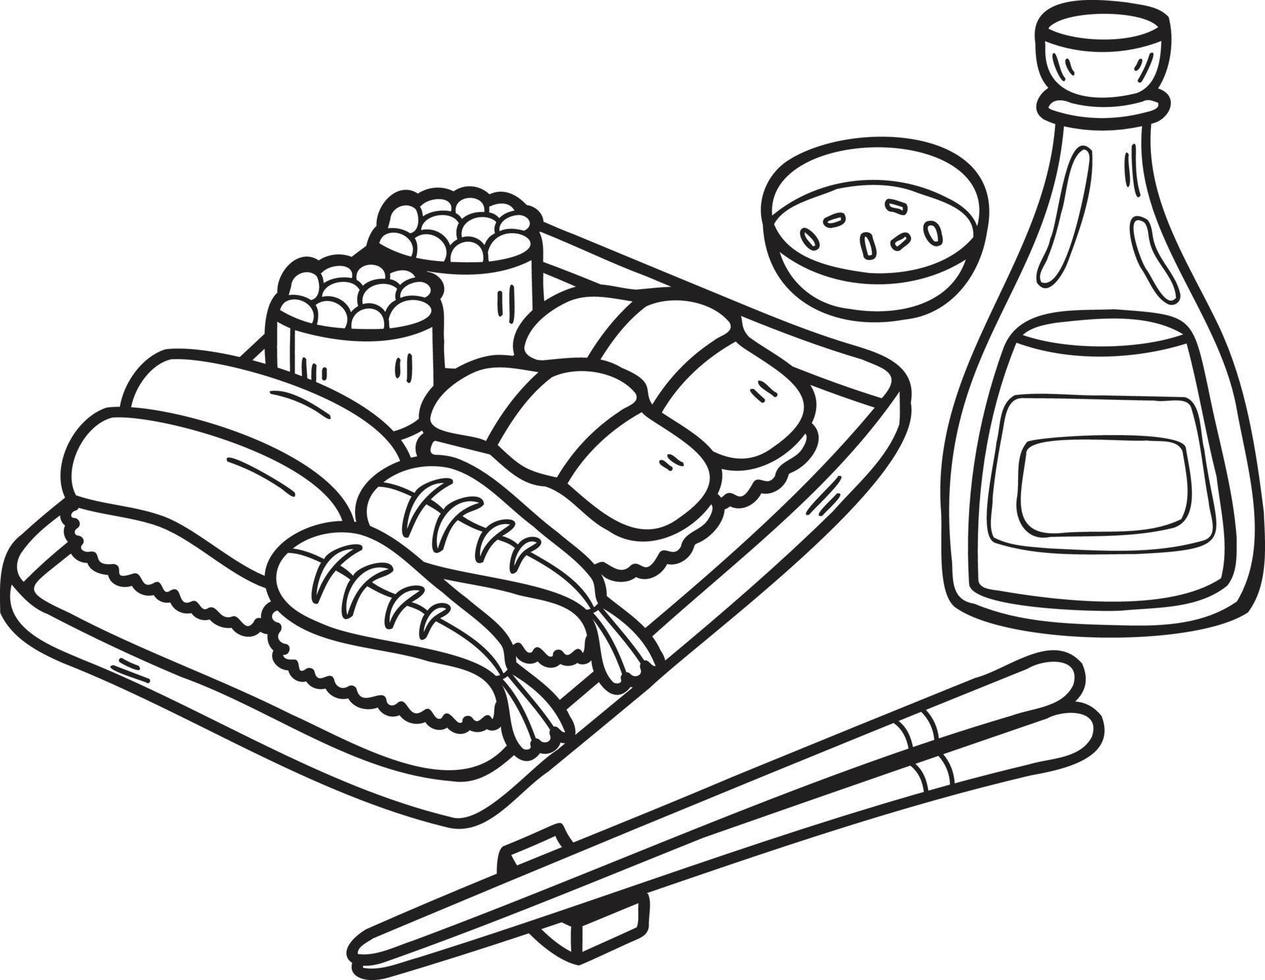 Hand Drawn sushi and chopsticks Chinese and Japanese food illustration vector